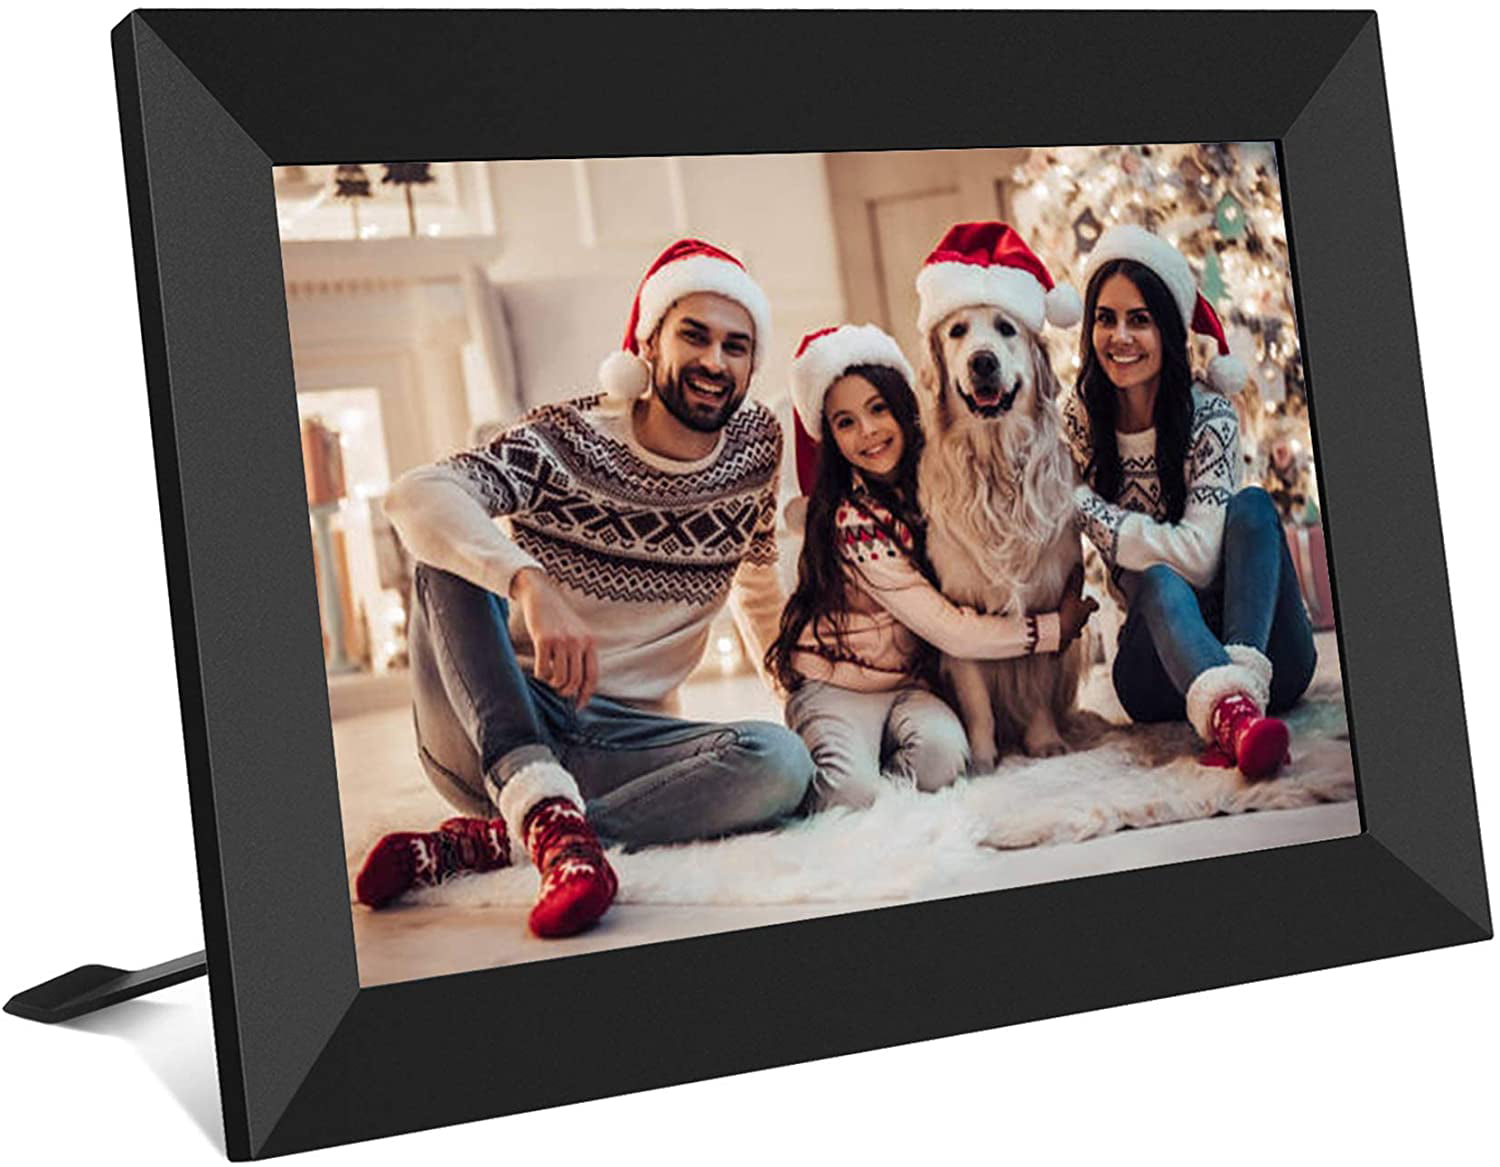 Touch Screen 10 Inch 16gb Smart WiFi Cloud Digital Picture Frame with 800x1280 IPS LCD Panel White Email Photos from Anywhere